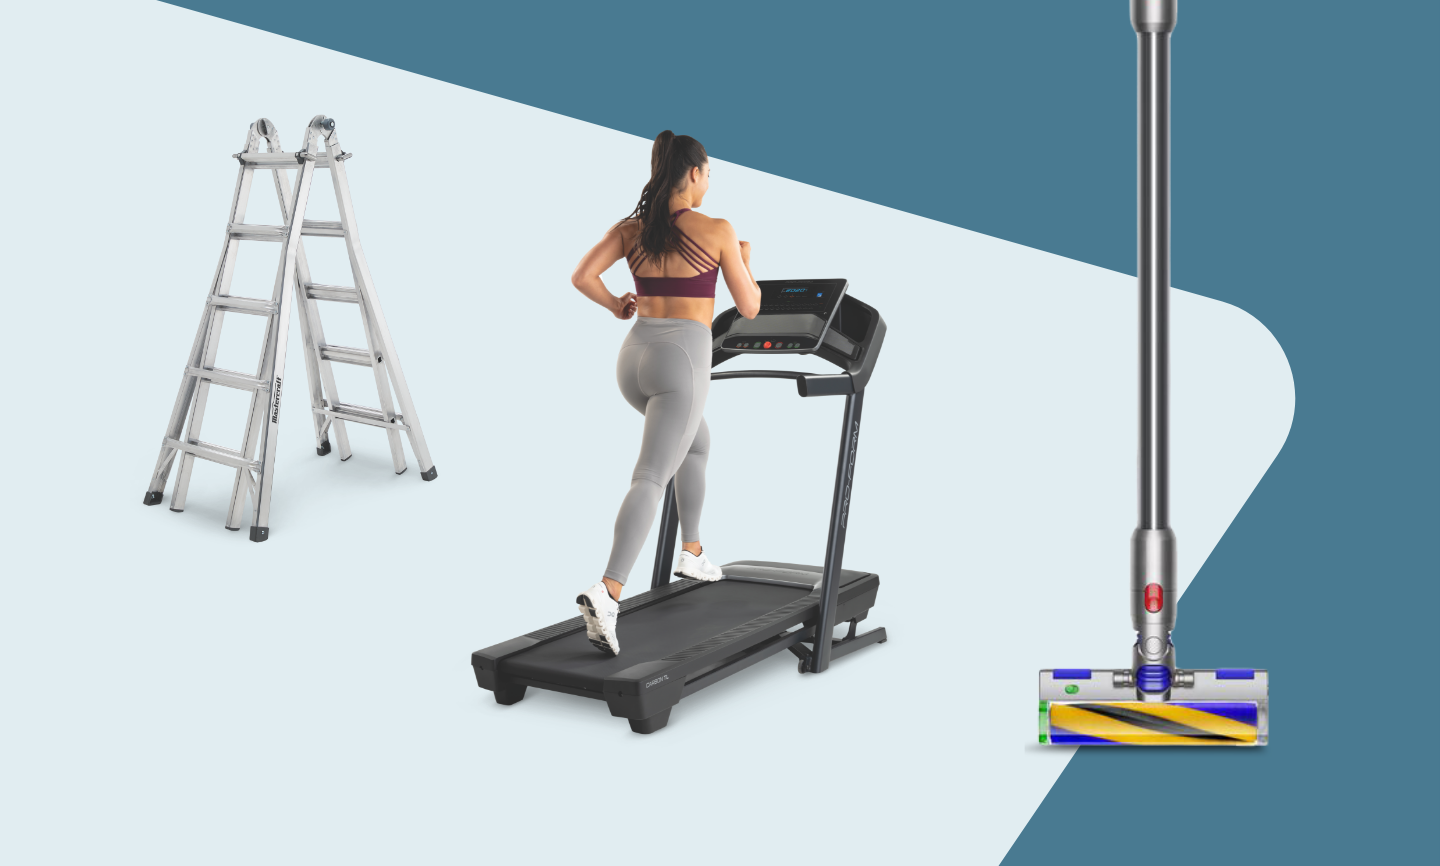 A Mastercraft Multitask Ladder, 21-ft  A woman running on a ProForm Carbon Treadmill.  A Dyson V15 Detect Cordless Stick Vacuum Cleaner